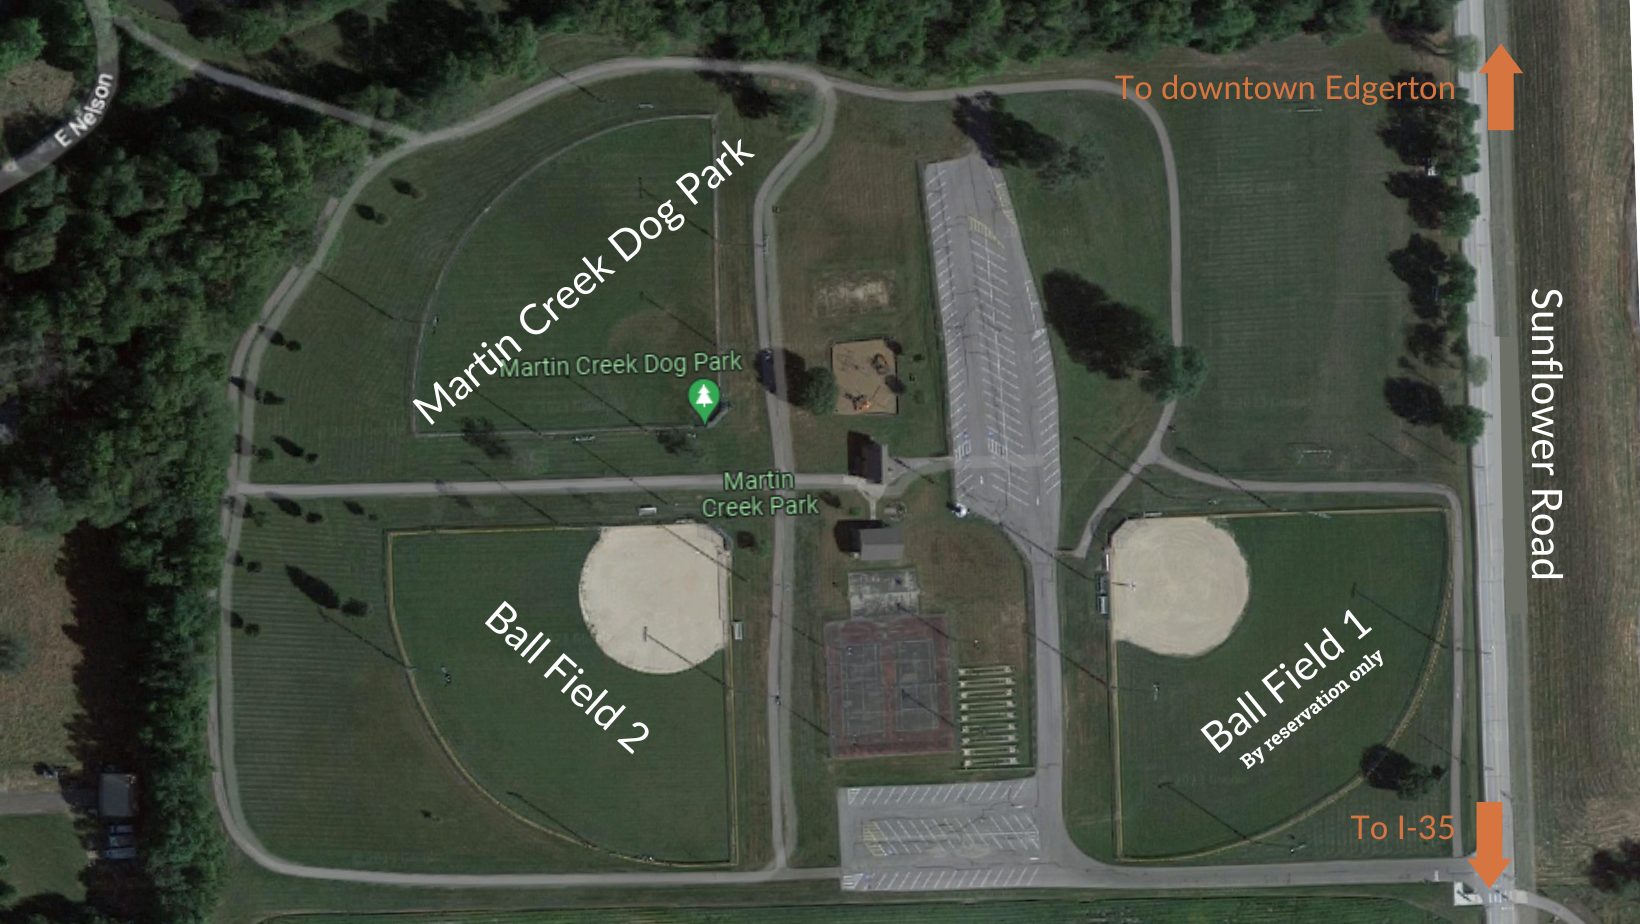 A map of Martin Creek Park showing Field 1 next to Sunflower Road. Field 2 in the southwest corner of the park and the dog park in the northwest corner.